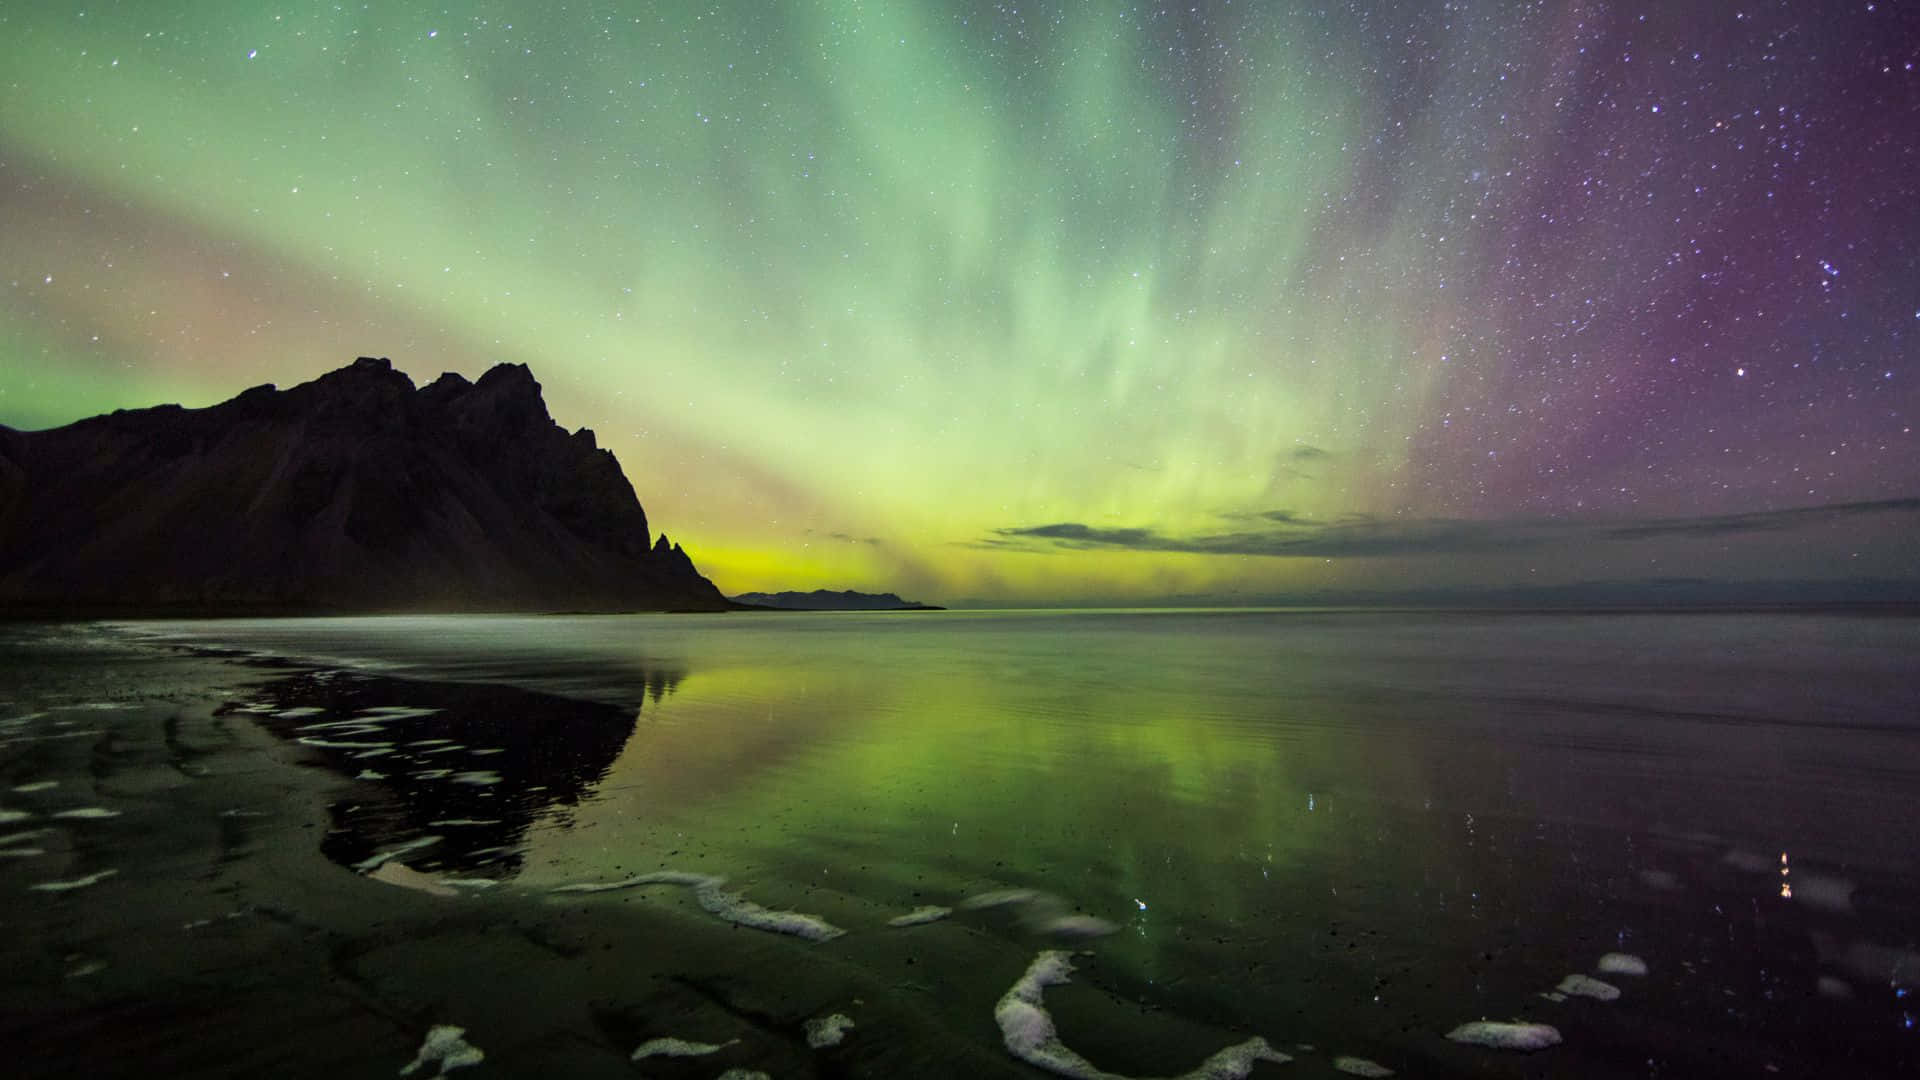 A mesmerizing night sky illuminated by magnificent northern lights